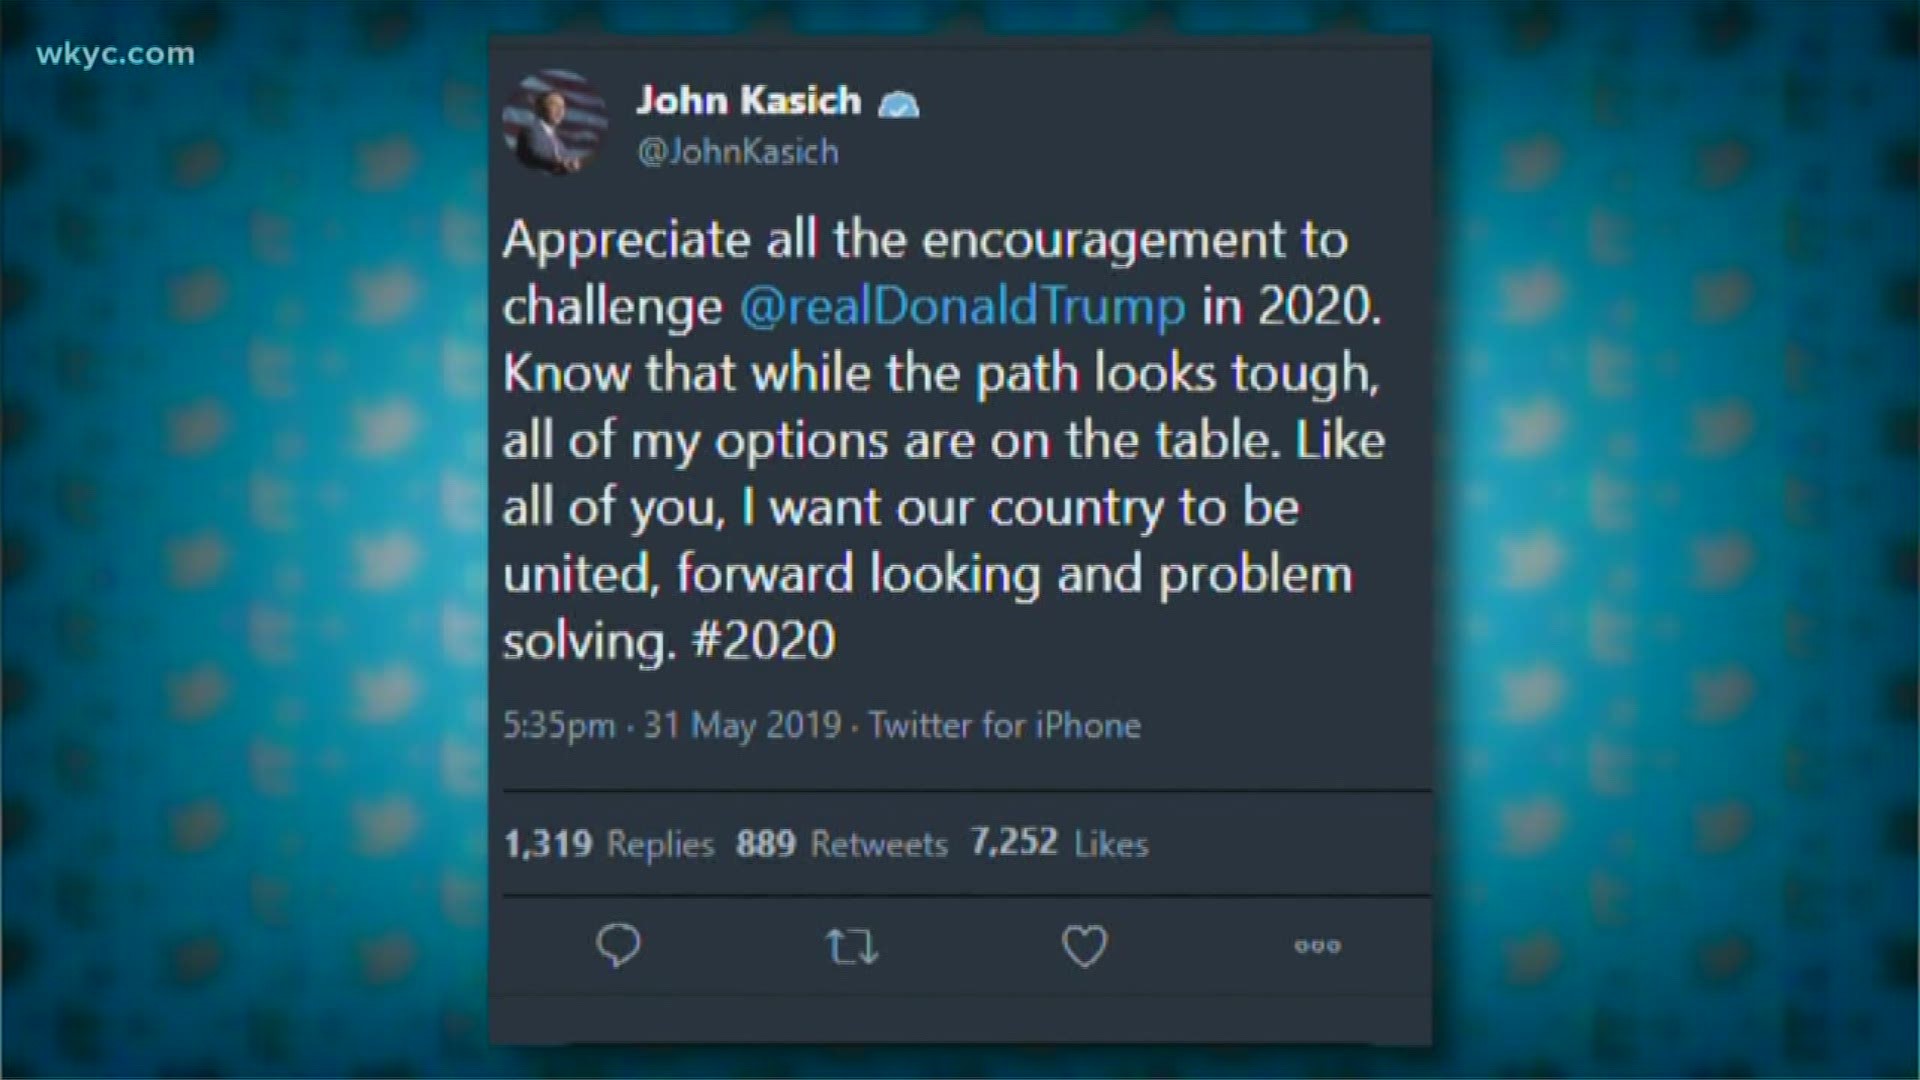 On Friday, Kasich put out a cryptic tweet. He wrote, "Appreciate all the encouragement to challenge President Trump in 2020. Know that while the paths looks tough, all of my options are on the table."